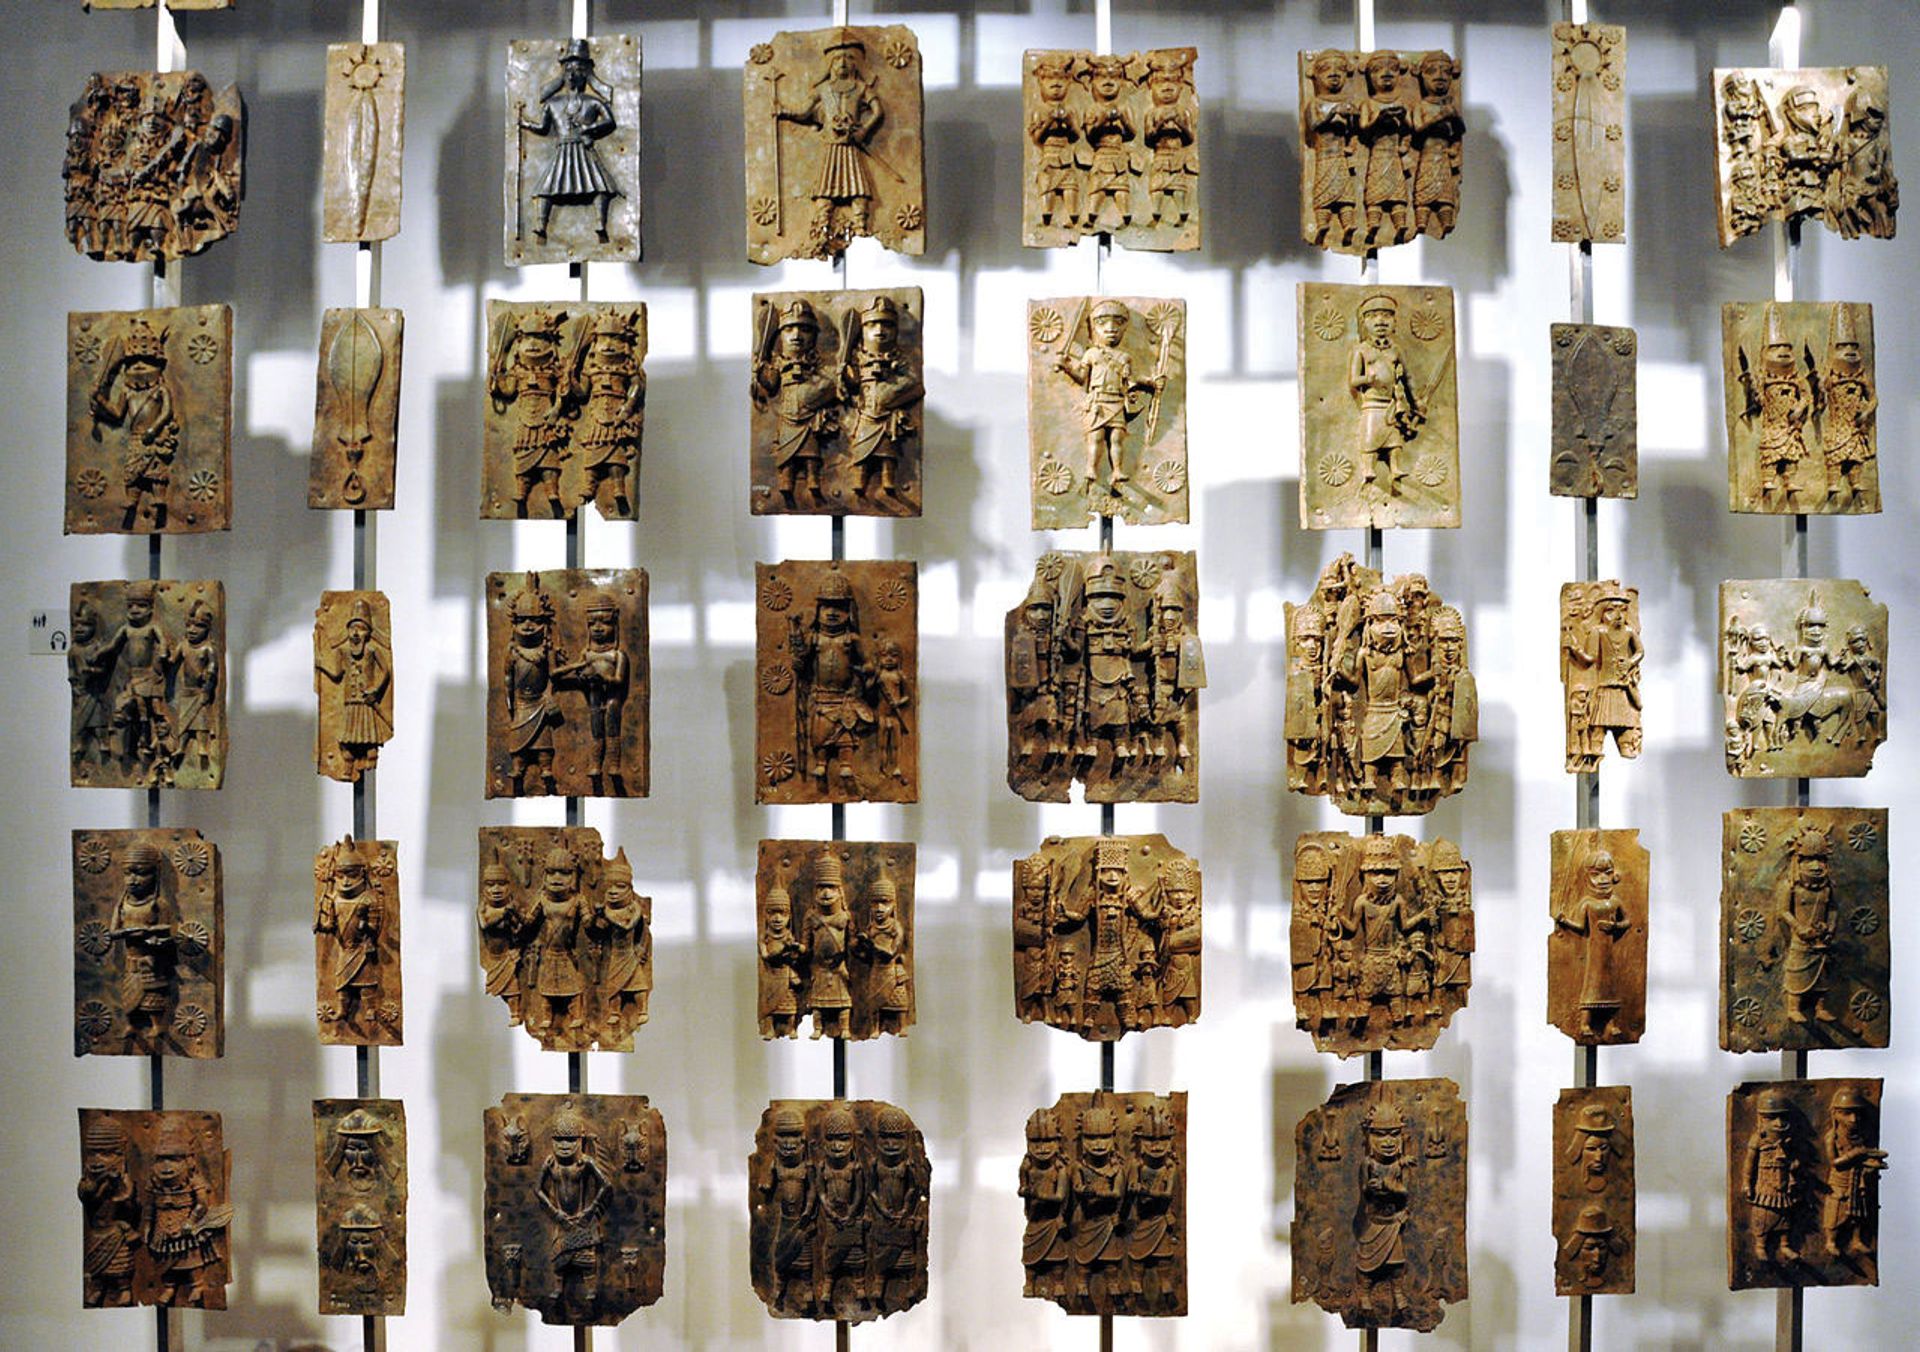 Cast brass plaques, known as “bronzes”, are among around 700 Benin objects in the British Museum’s collection Andreas Praefcke